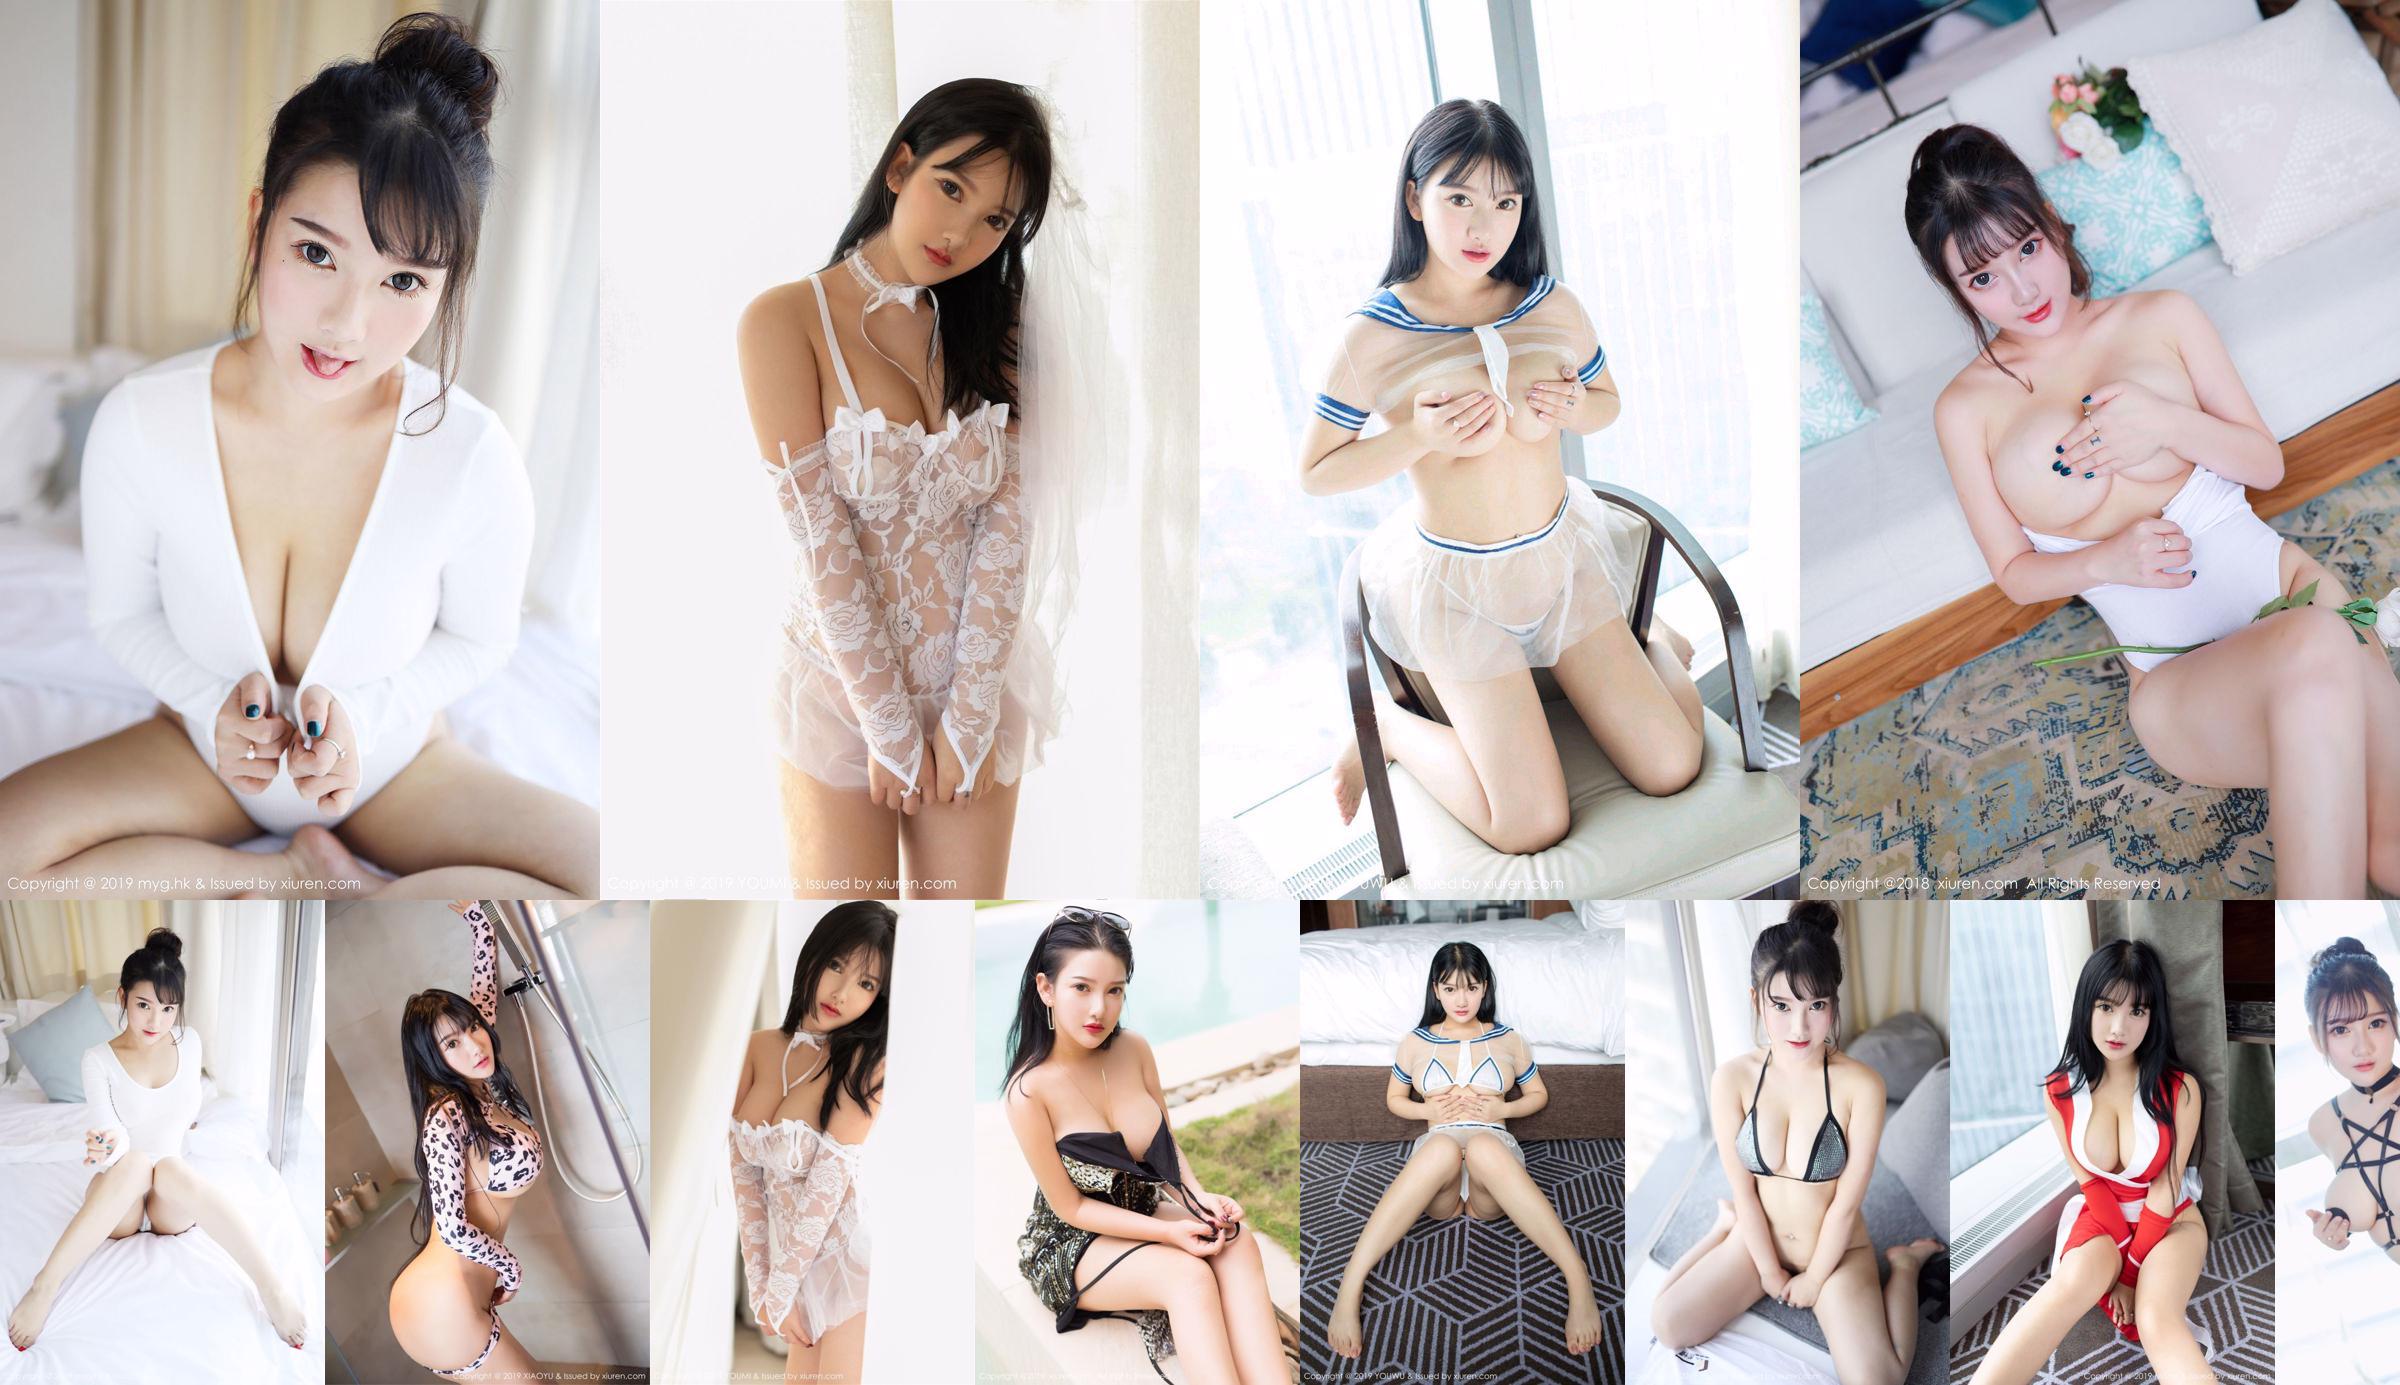 Little Yuna "Sexy Lingerie" [Youwuguan YouWu] Vol.134 No.b2d963 Page 4